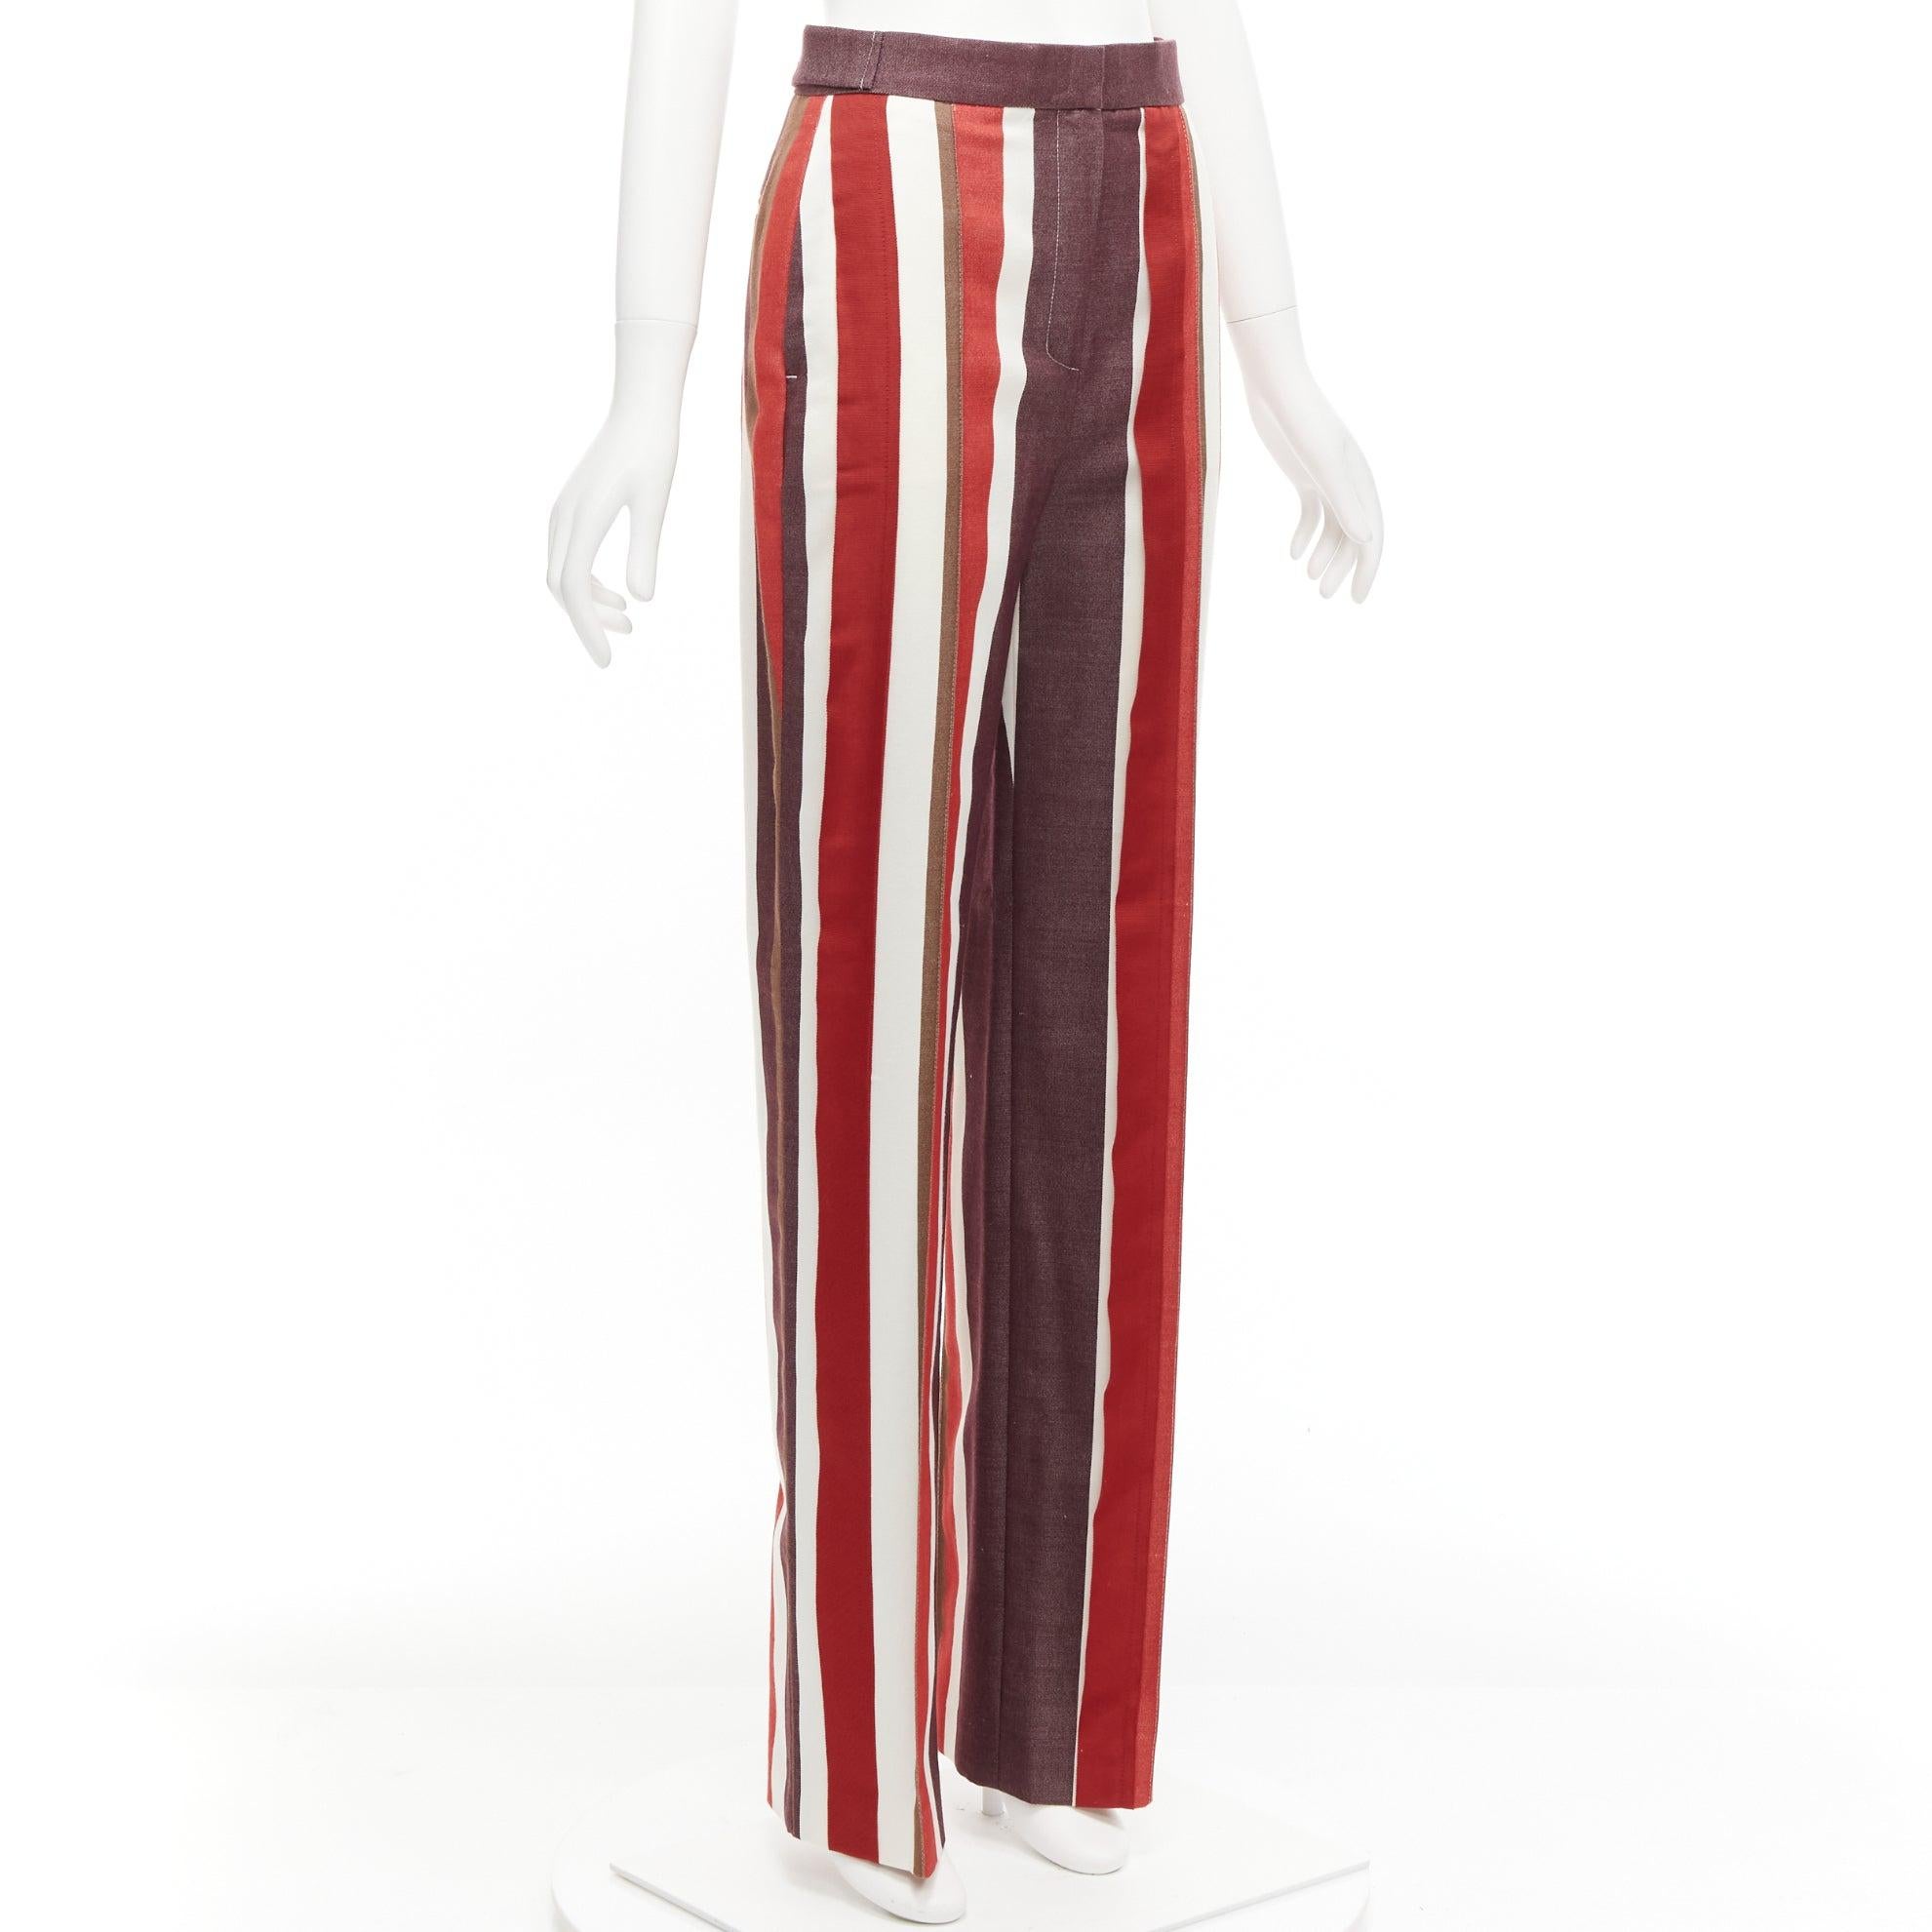 FRENKEN red cotton wool blend graphic stripe wide leg pants IT34 XXS
Reference: CELG/A00372
Brand: Frenken
Material: Cotton, Wool, Blend
Color: Red, White
Pattern: Striped
Closure: Zip Fly
Extra Details: Buttons for adjustments at back